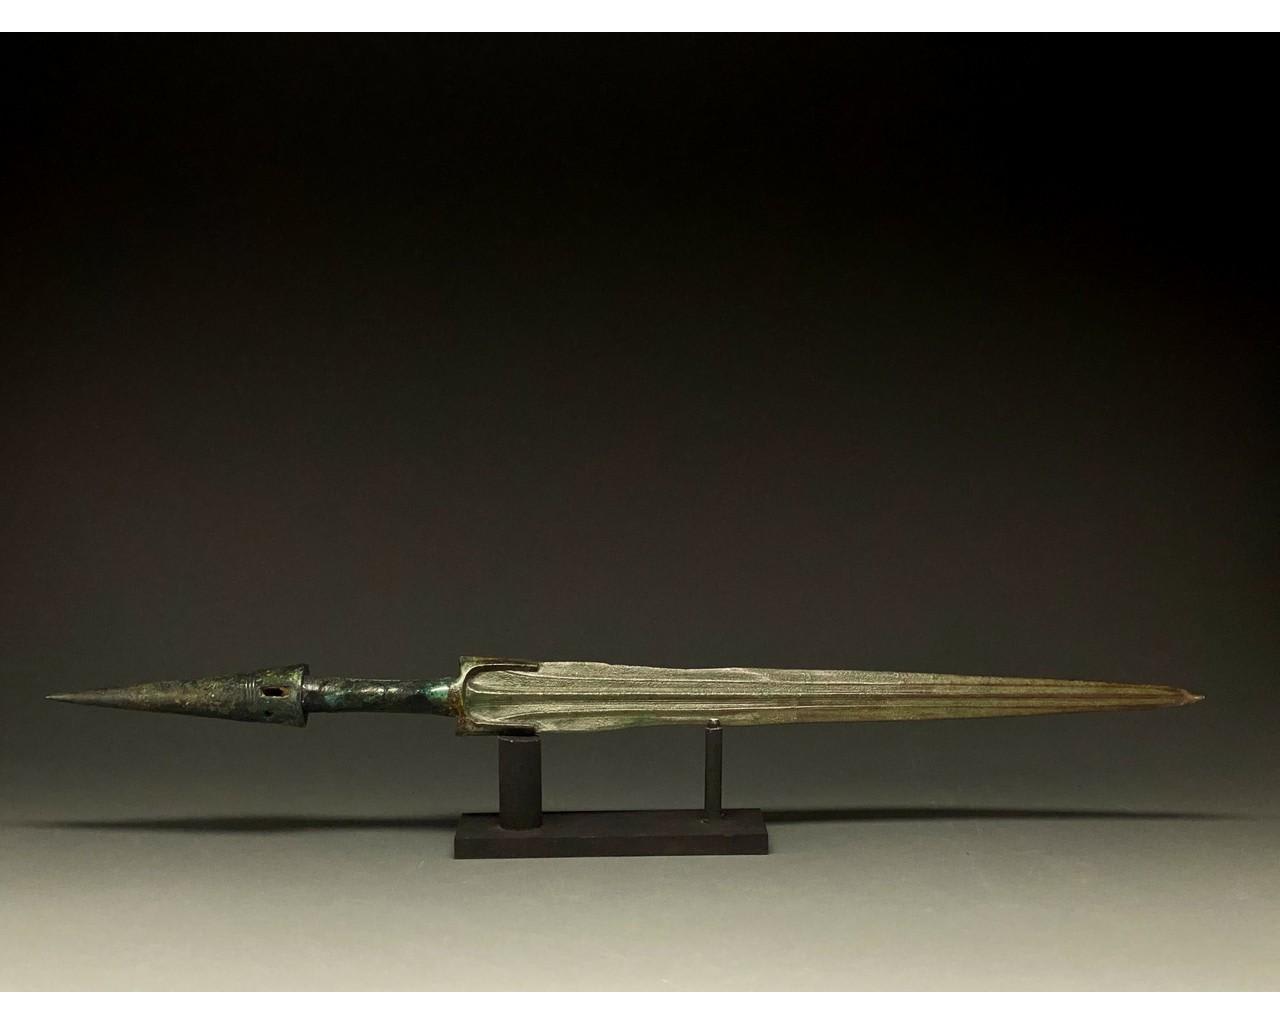 Another Bronze 'Sword' from Luristan (Iran) dated to the 2nd Millennium BC. An uncommon weapon design reminiscent of the short Assegai used later by the Zulu in Southern Africa. From Pax Romana Auction.